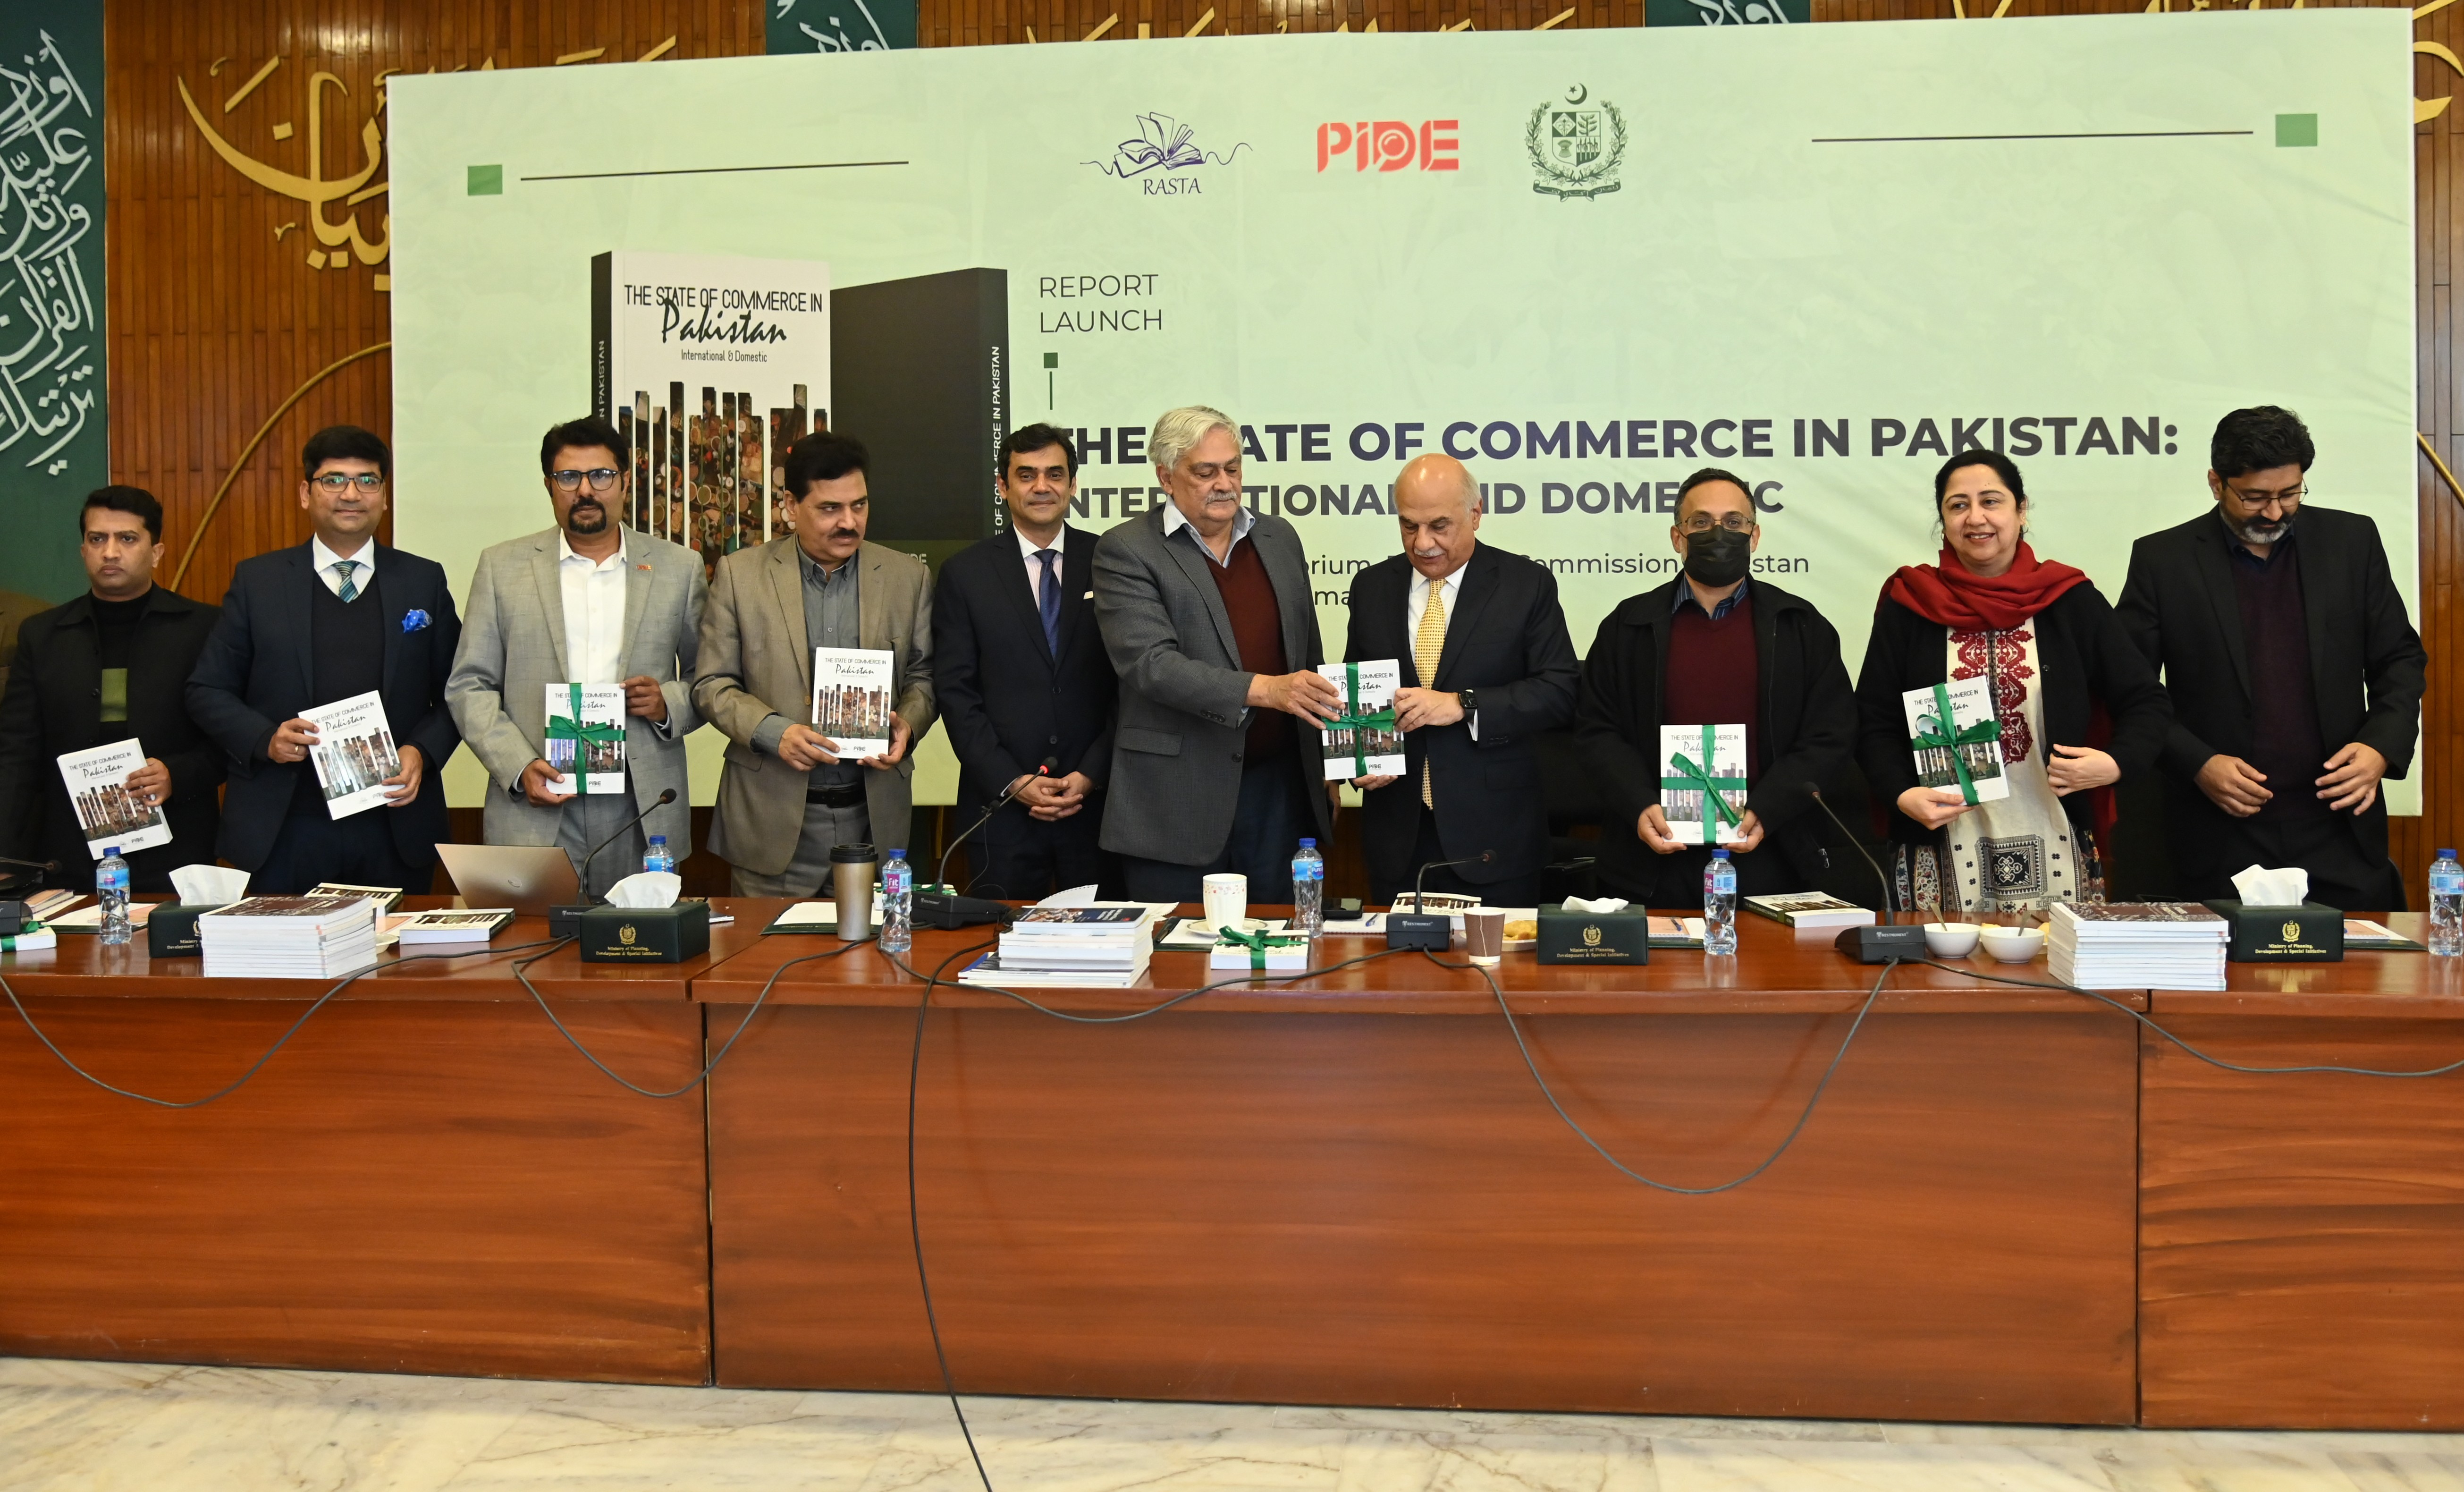 The Group photo of members of the Planning Commission of Pakistan and PIDE